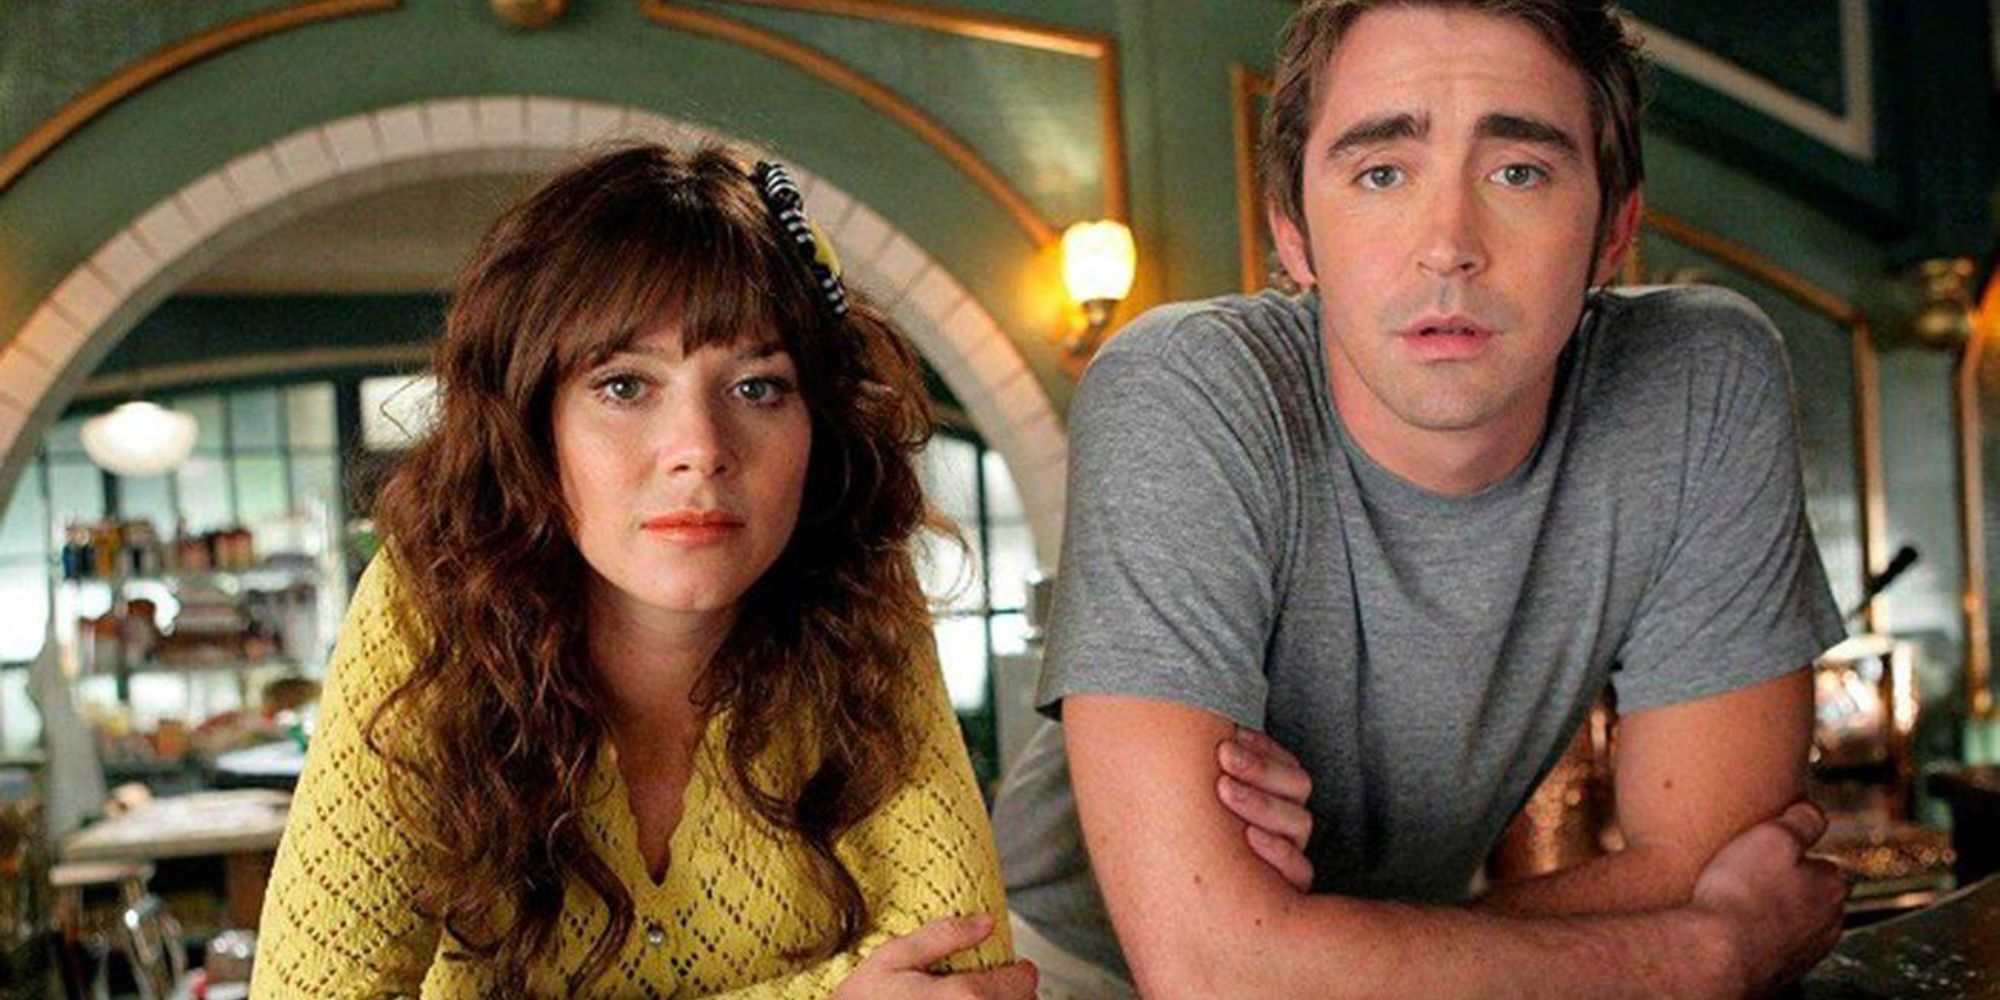 Anna Friel and Lee Pace in Pushing Daisies lean on a counter and look at the camera.